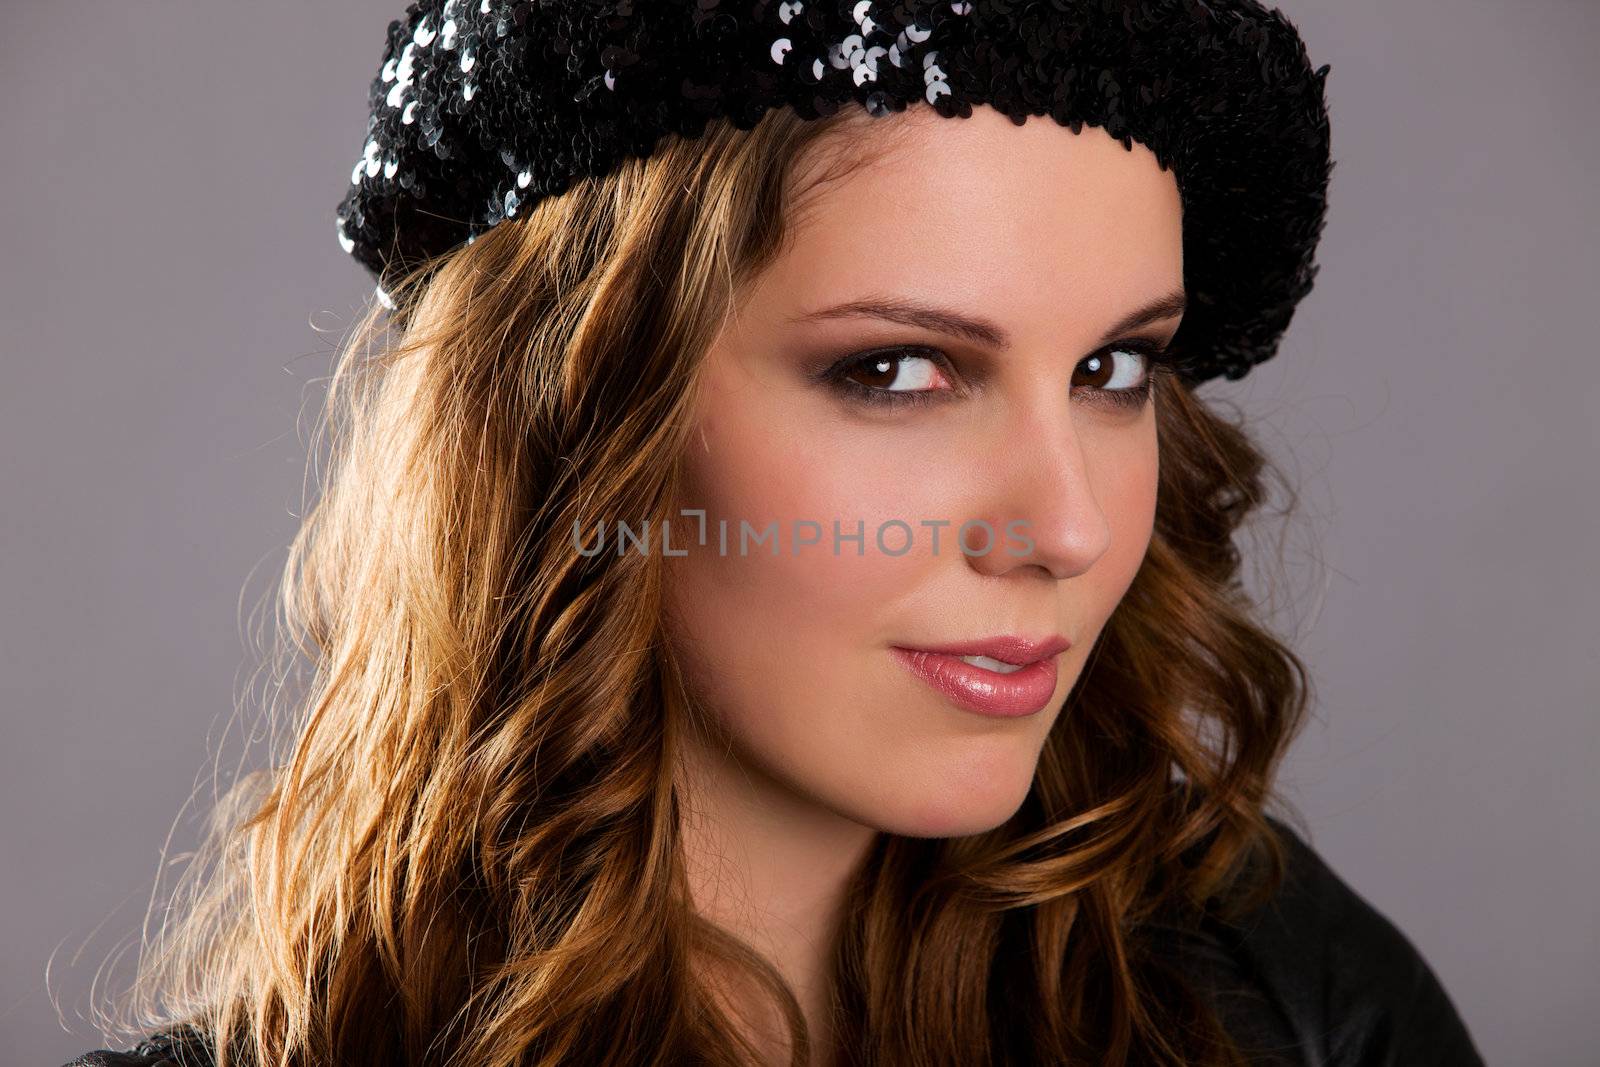 Attractive caucasian woman model looking at the camera with a 3/4 profile